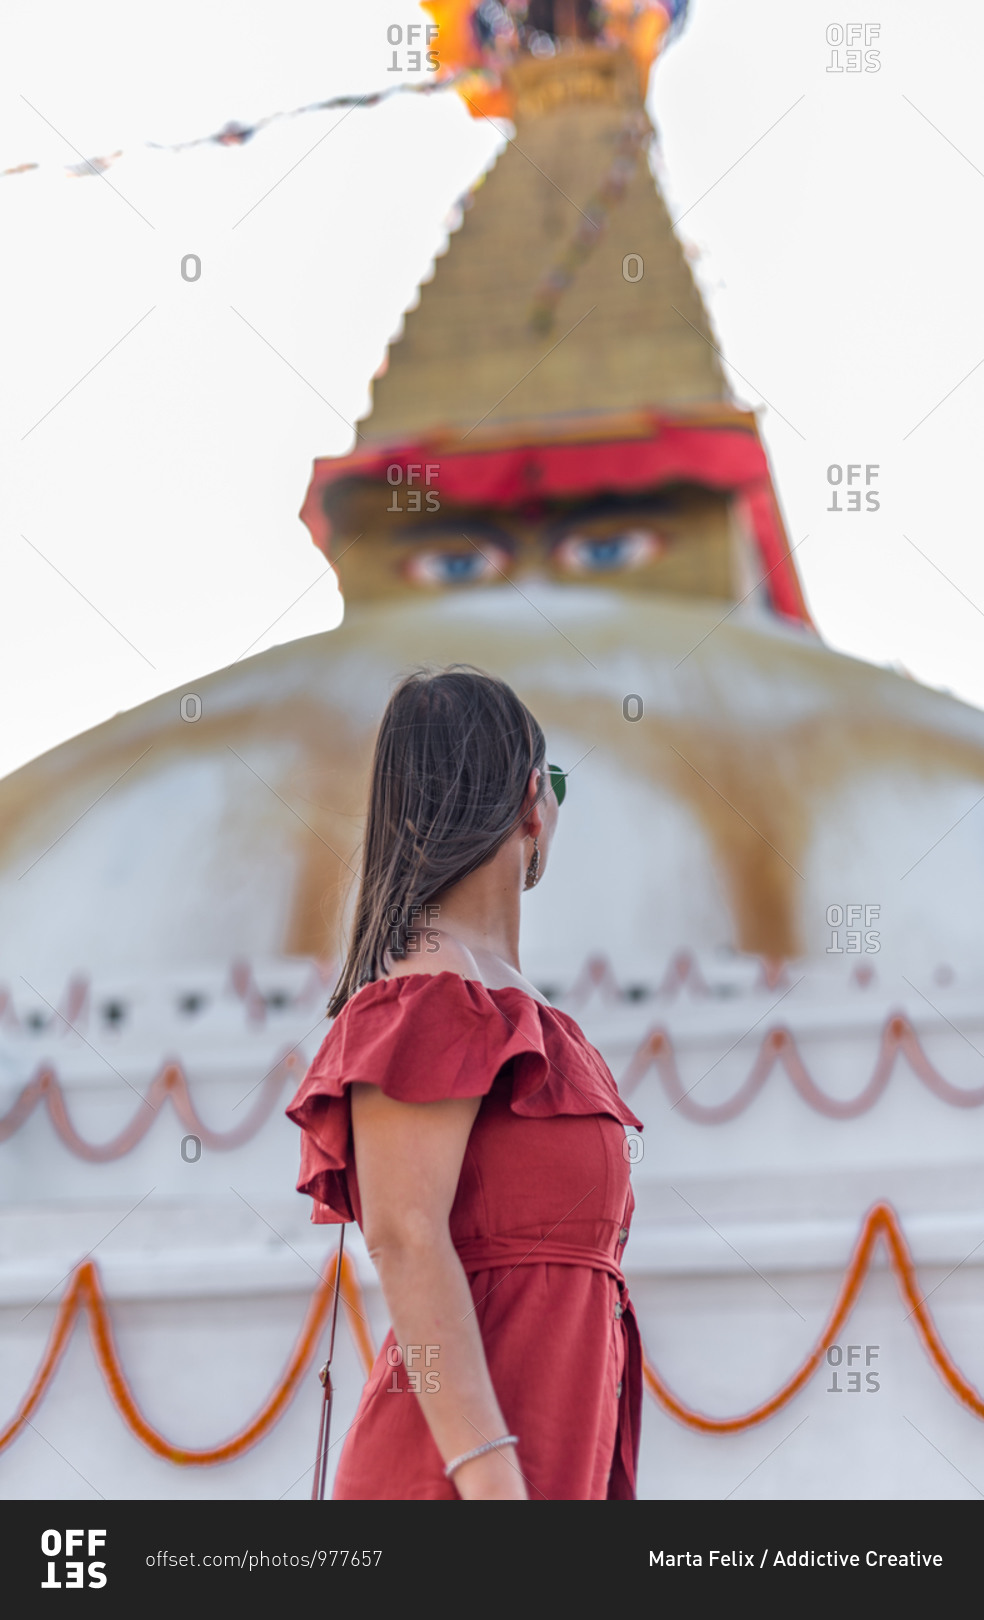 Side view of woman standing near Buddhist temple with decorative garlands and tower under cloudy sky in daylight